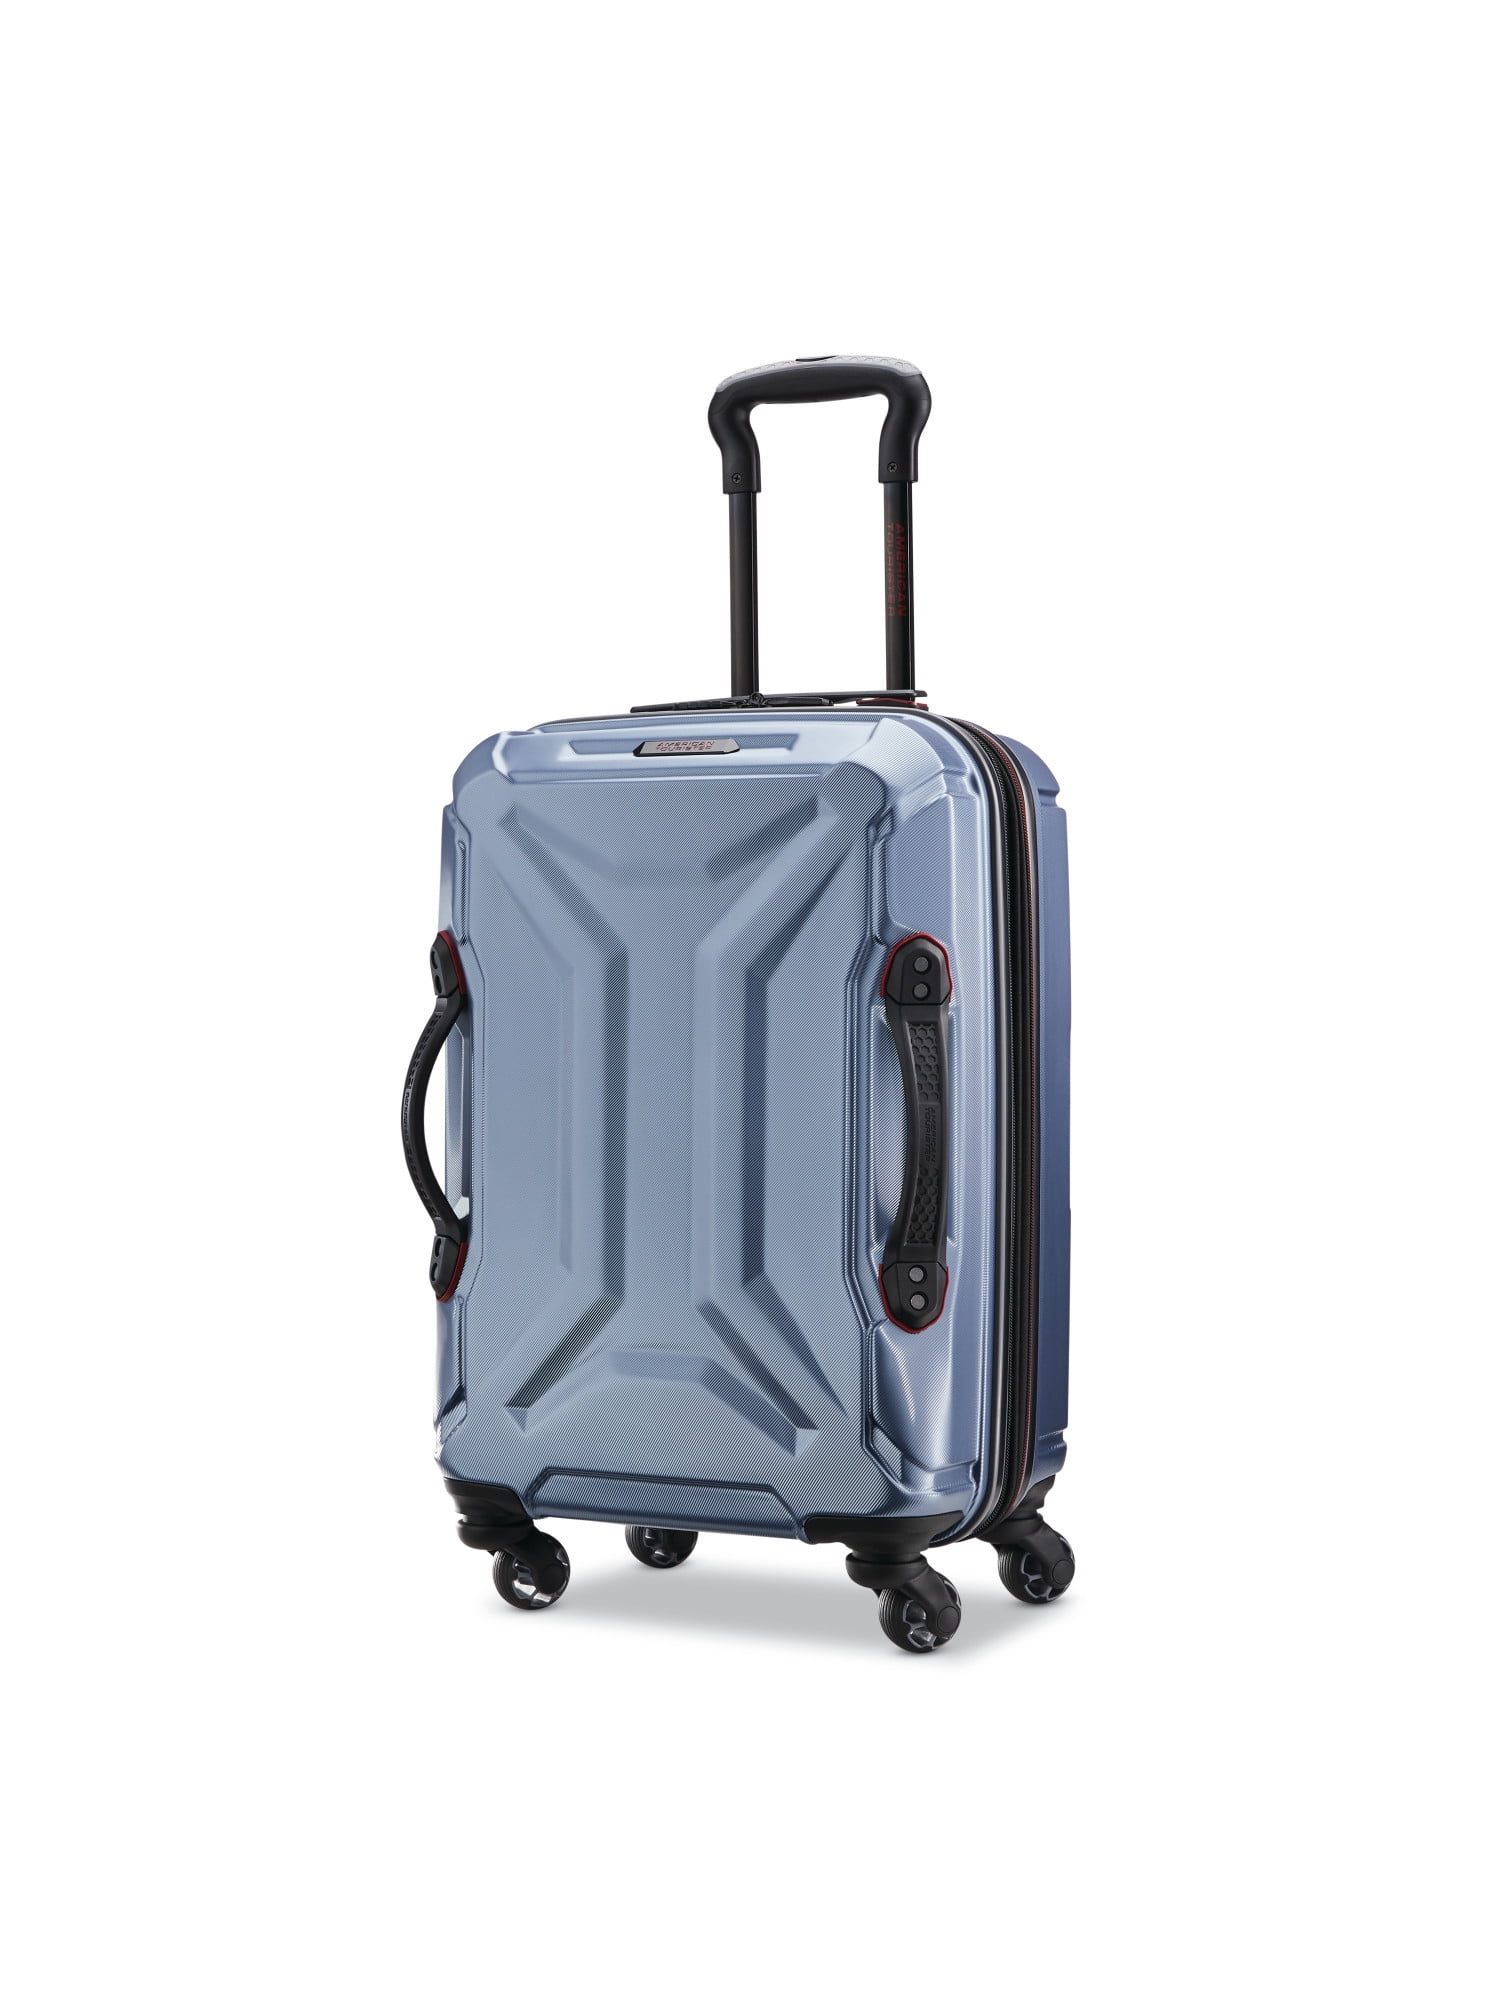 American Tourister Cargo Max 21&quot; Hardside Spinner Luggage, Slate Blue